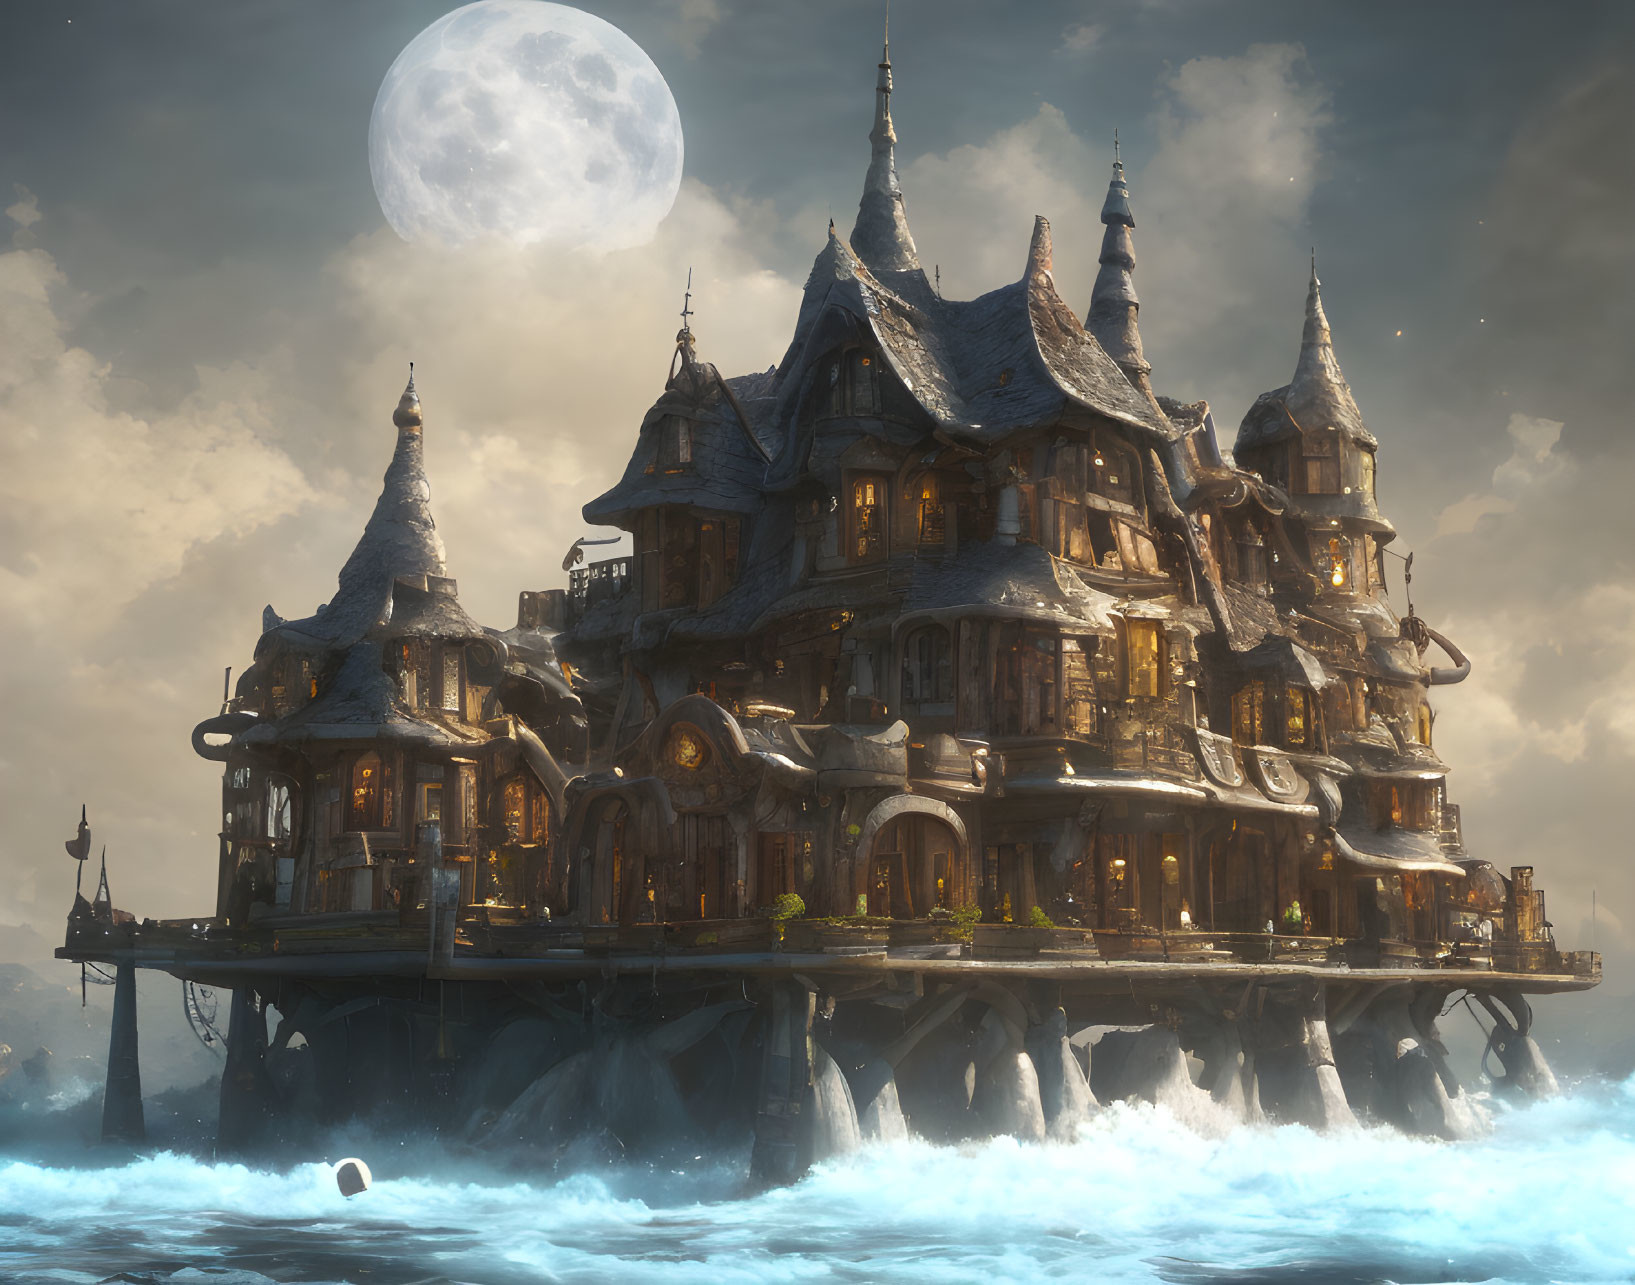 Fantasy mansion on rocky outcrop with crashing waves and large moon